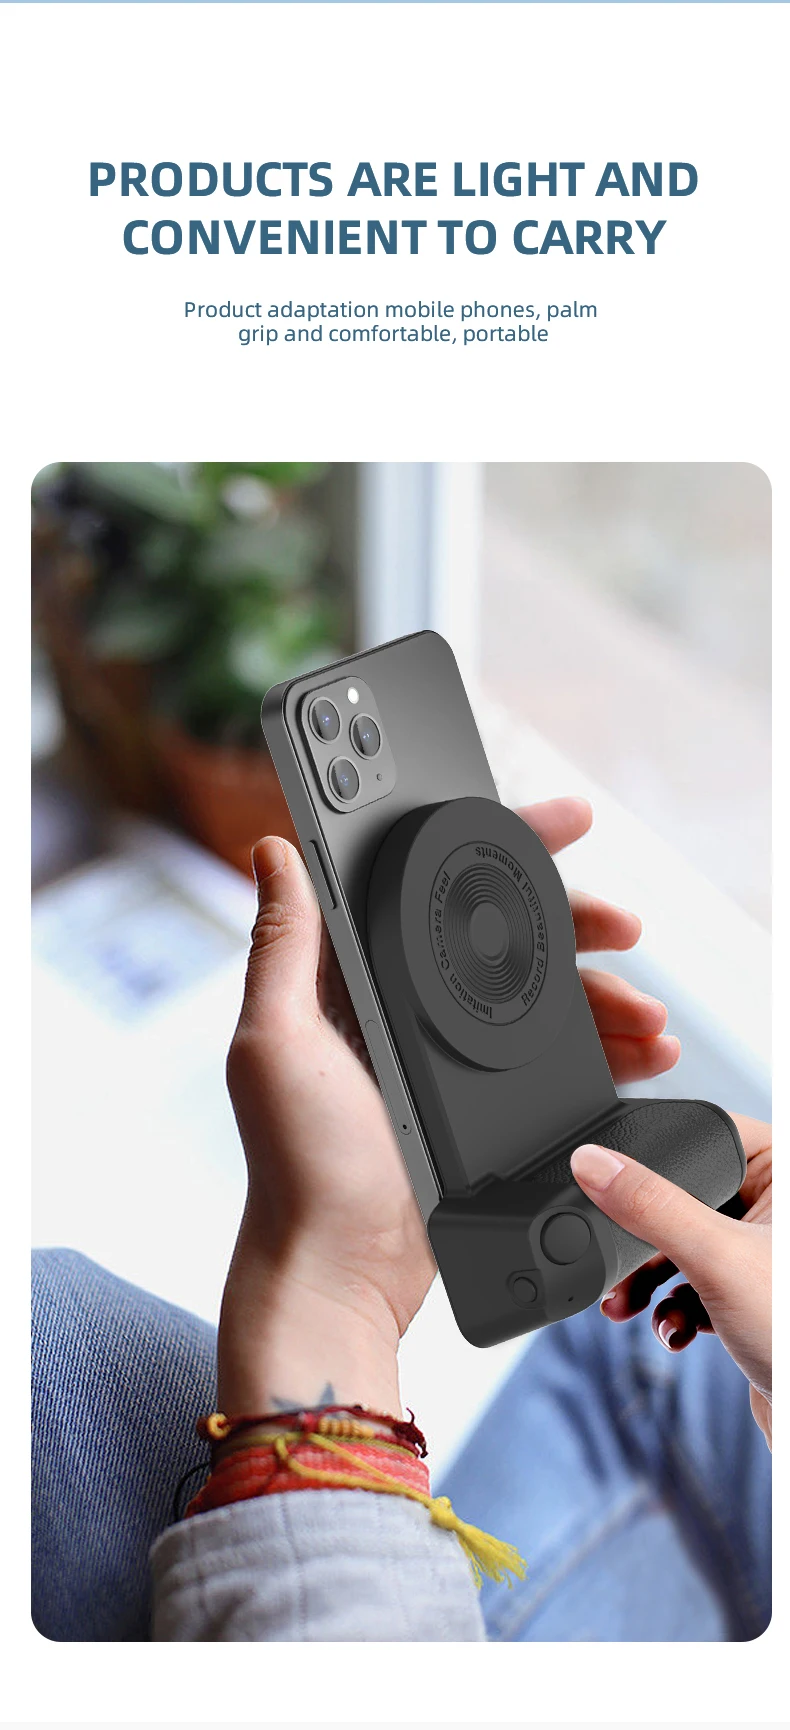 Power Bank Smartphone Selfie Booster Handle Grip Snap Shoot Photo Stabilizer Holder with Shutter Release 1/4 Screw Phone Stand